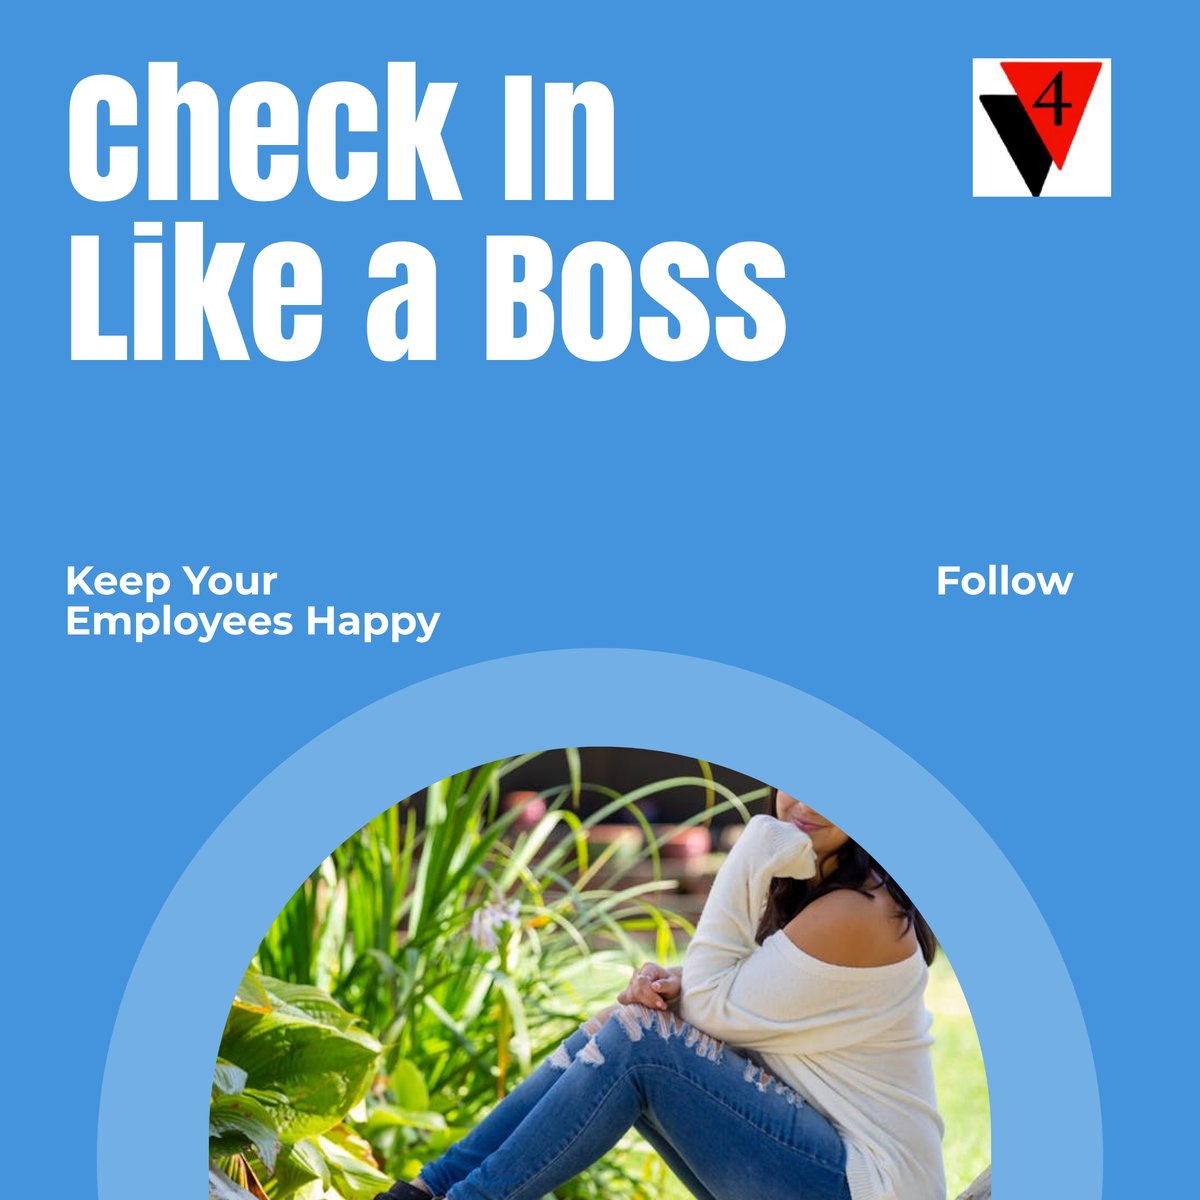 Hey there boss, if you're wondering how often to check in with your employees, the answer is simple: as often as you check your social media. Trust us, your business will thank you for it. 😉 #BossGoals #HappyEmployees